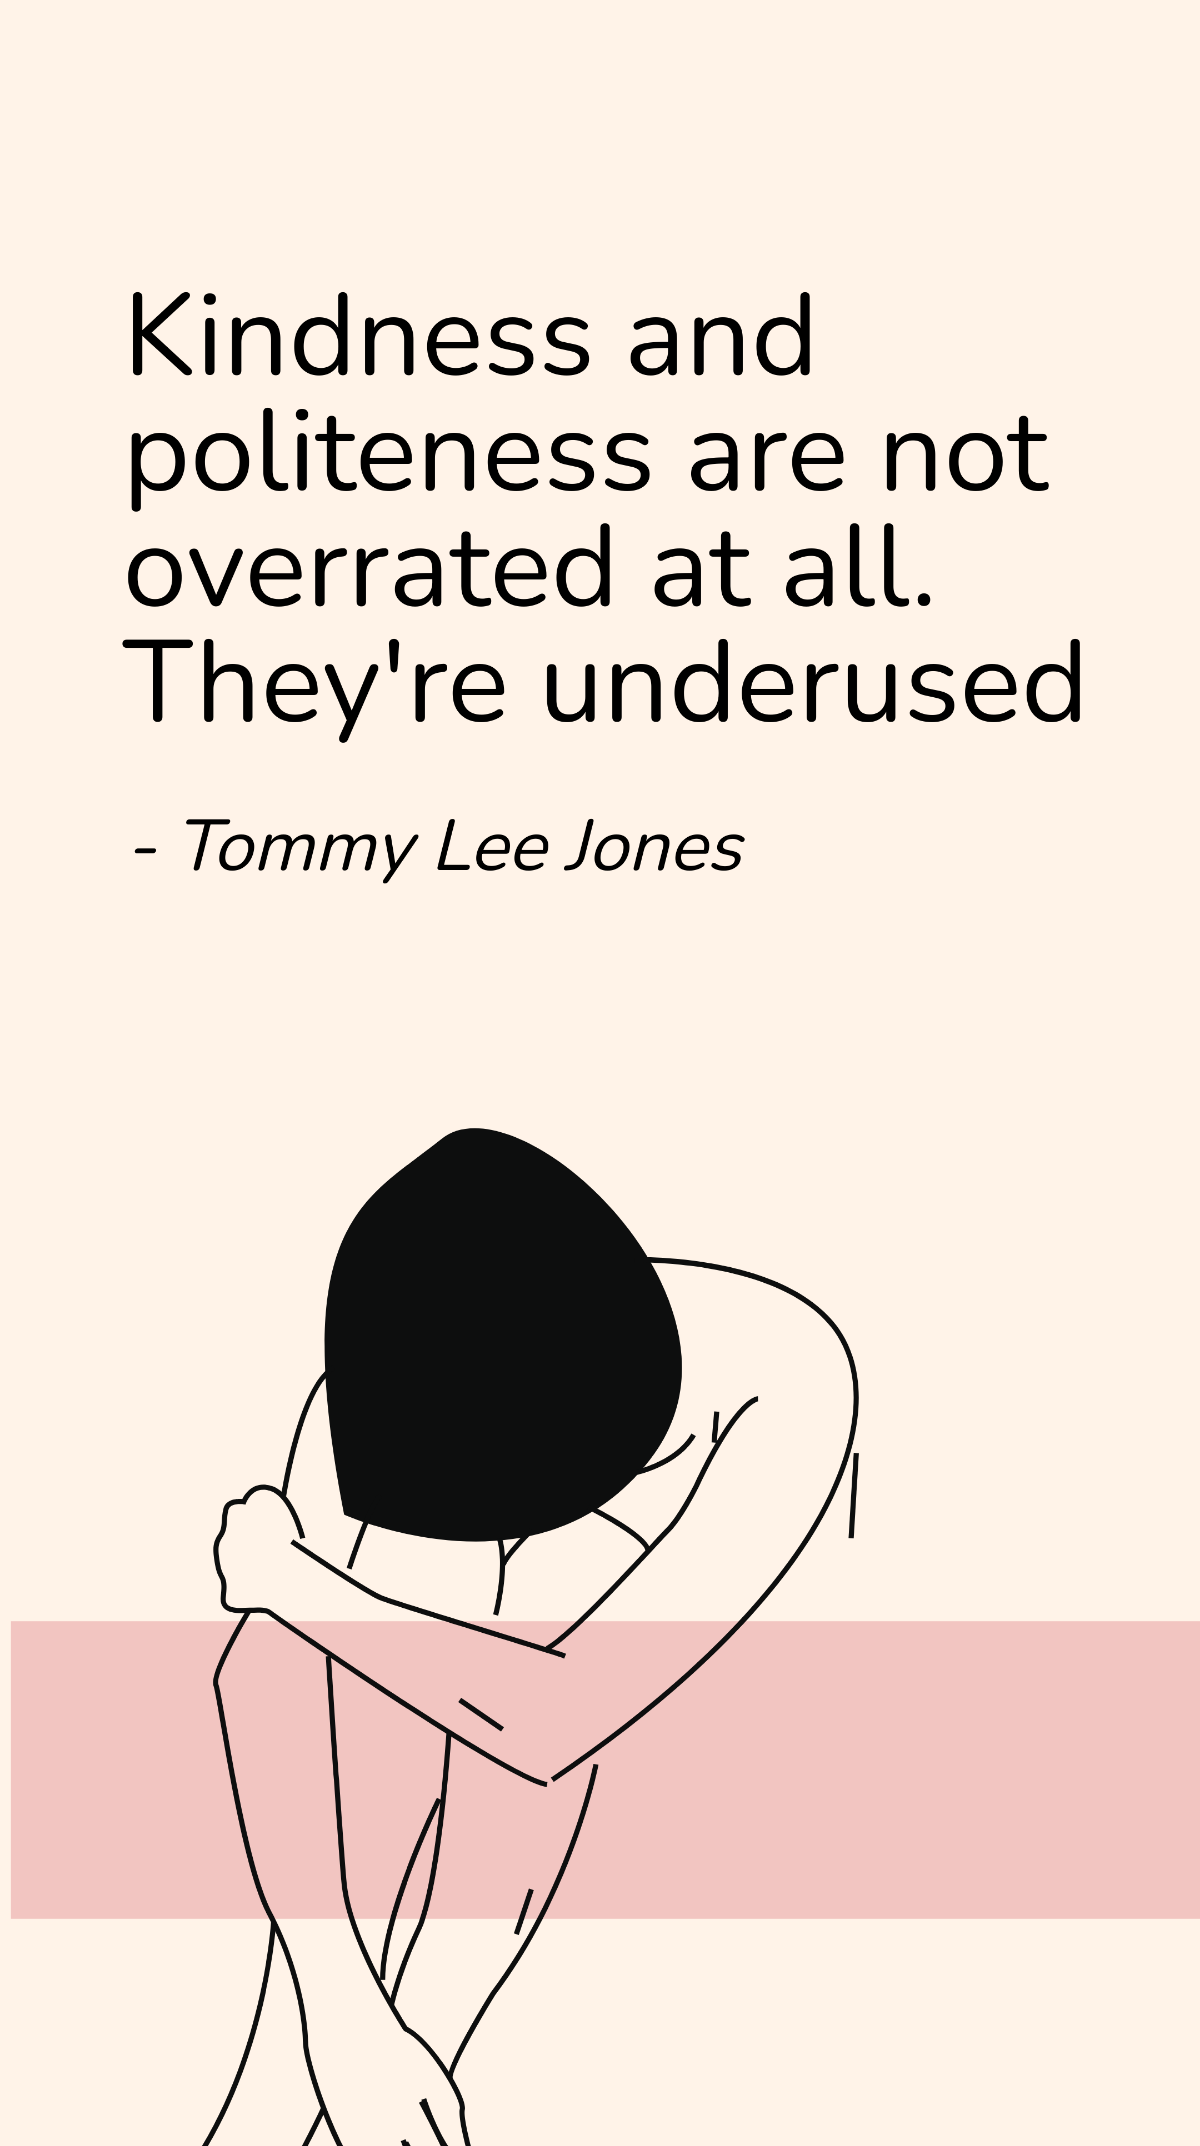 Tommy Lee Jones - Kindness and politeness are not overrated at all. They're underused Template